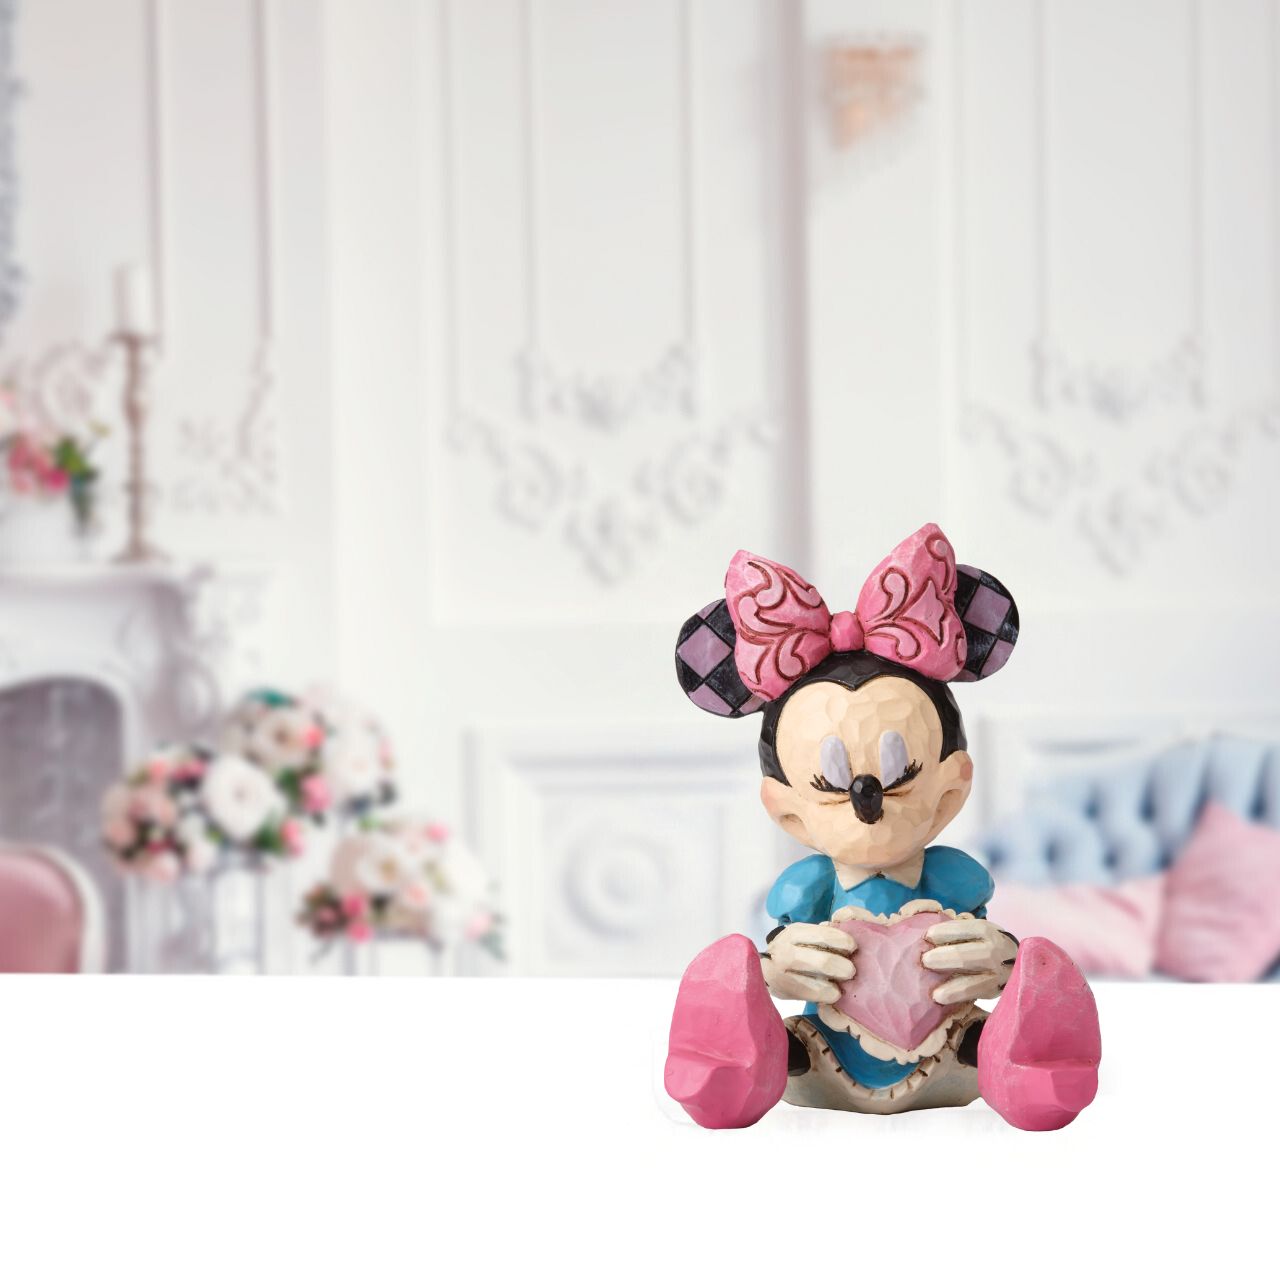 Disney Showcase Minnie Mouse with Heart Mini Figurine  Beautifully handcrafted with delightful attention to detail, Jim Shore's charming miniatures capture the essence of the beloved Disney characters. Making a wish on a heart held close, this beguiling Minnie is a heartfelt and playful romantic design.